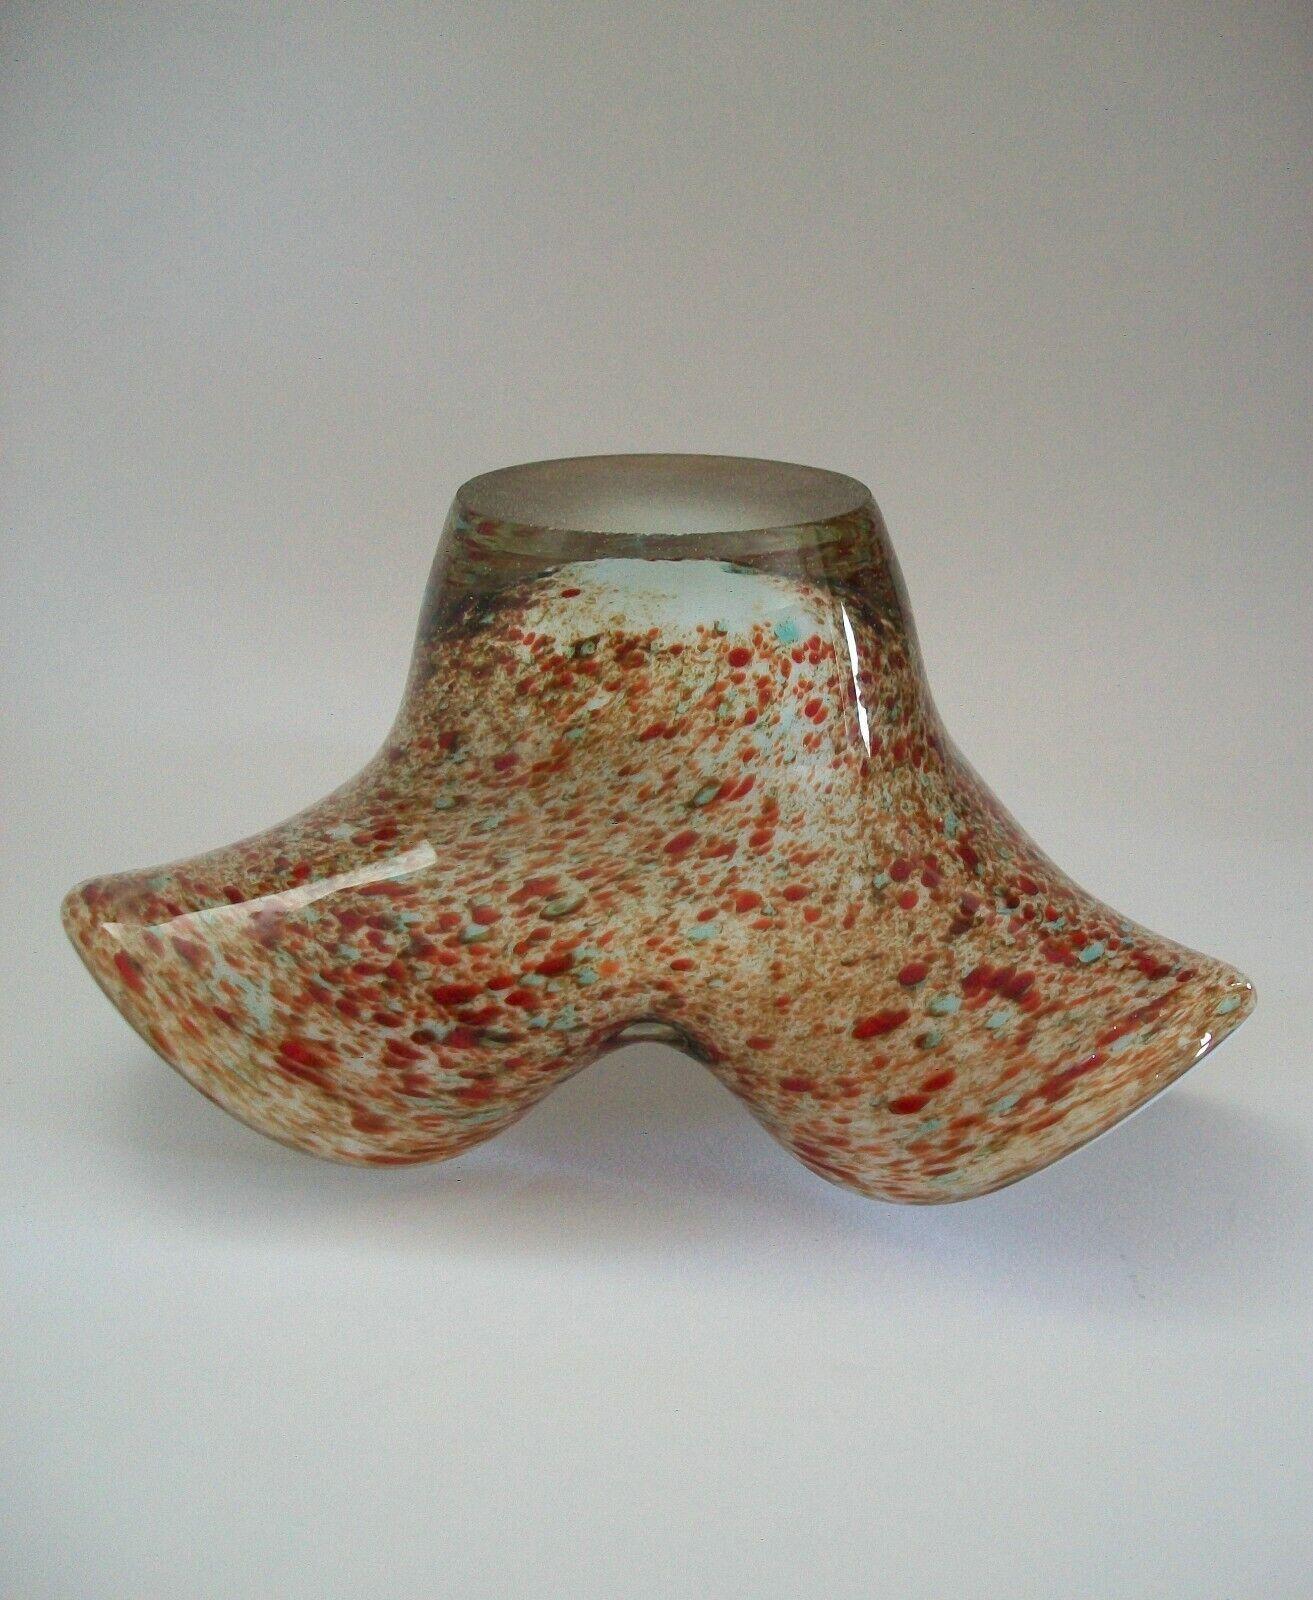 Midcentury Murano Trefoil Speckled Glass Bowl - Unsigned - Italy - circa 1970s For Sale 2